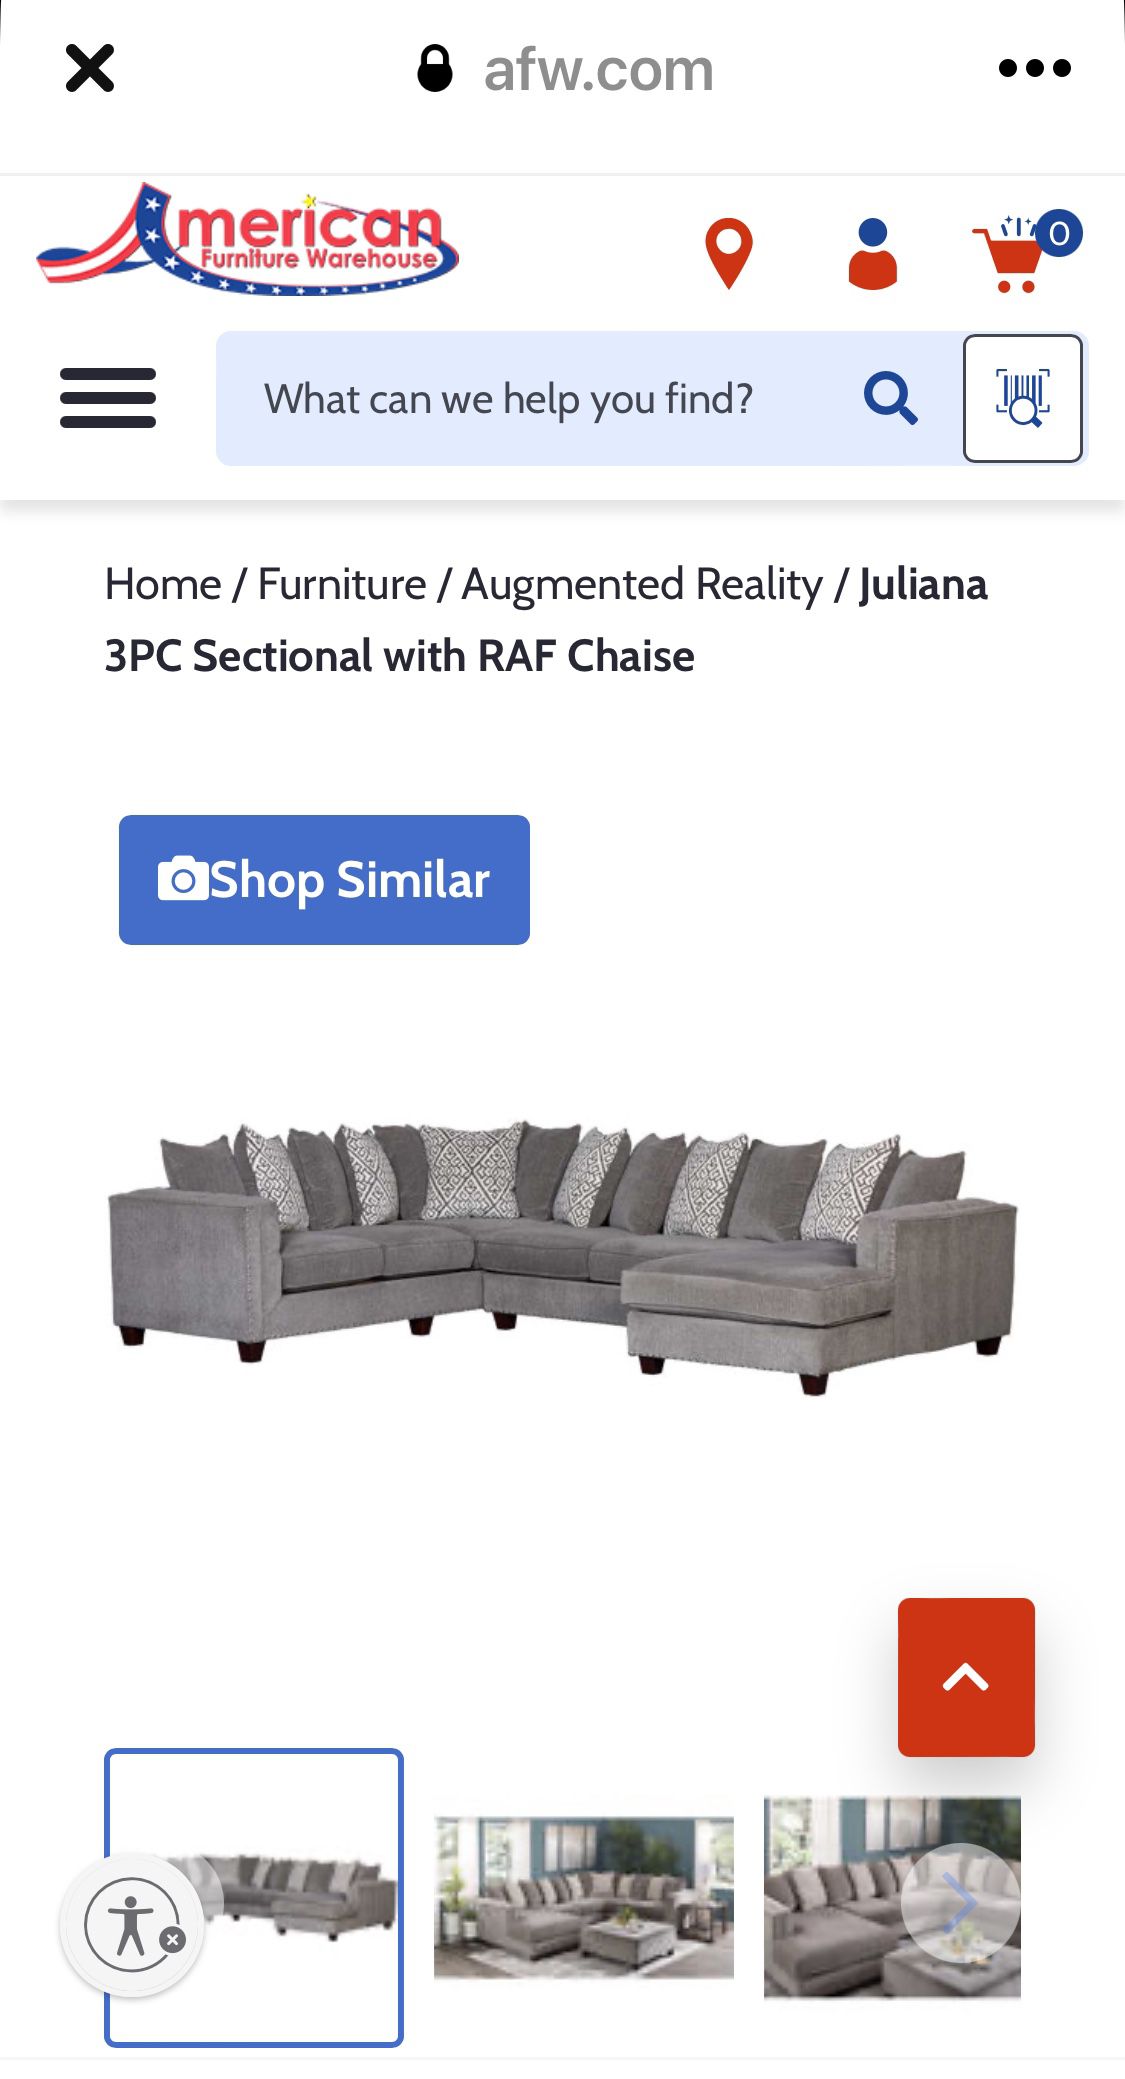 3PC Sectional with RAF Chaise sofa